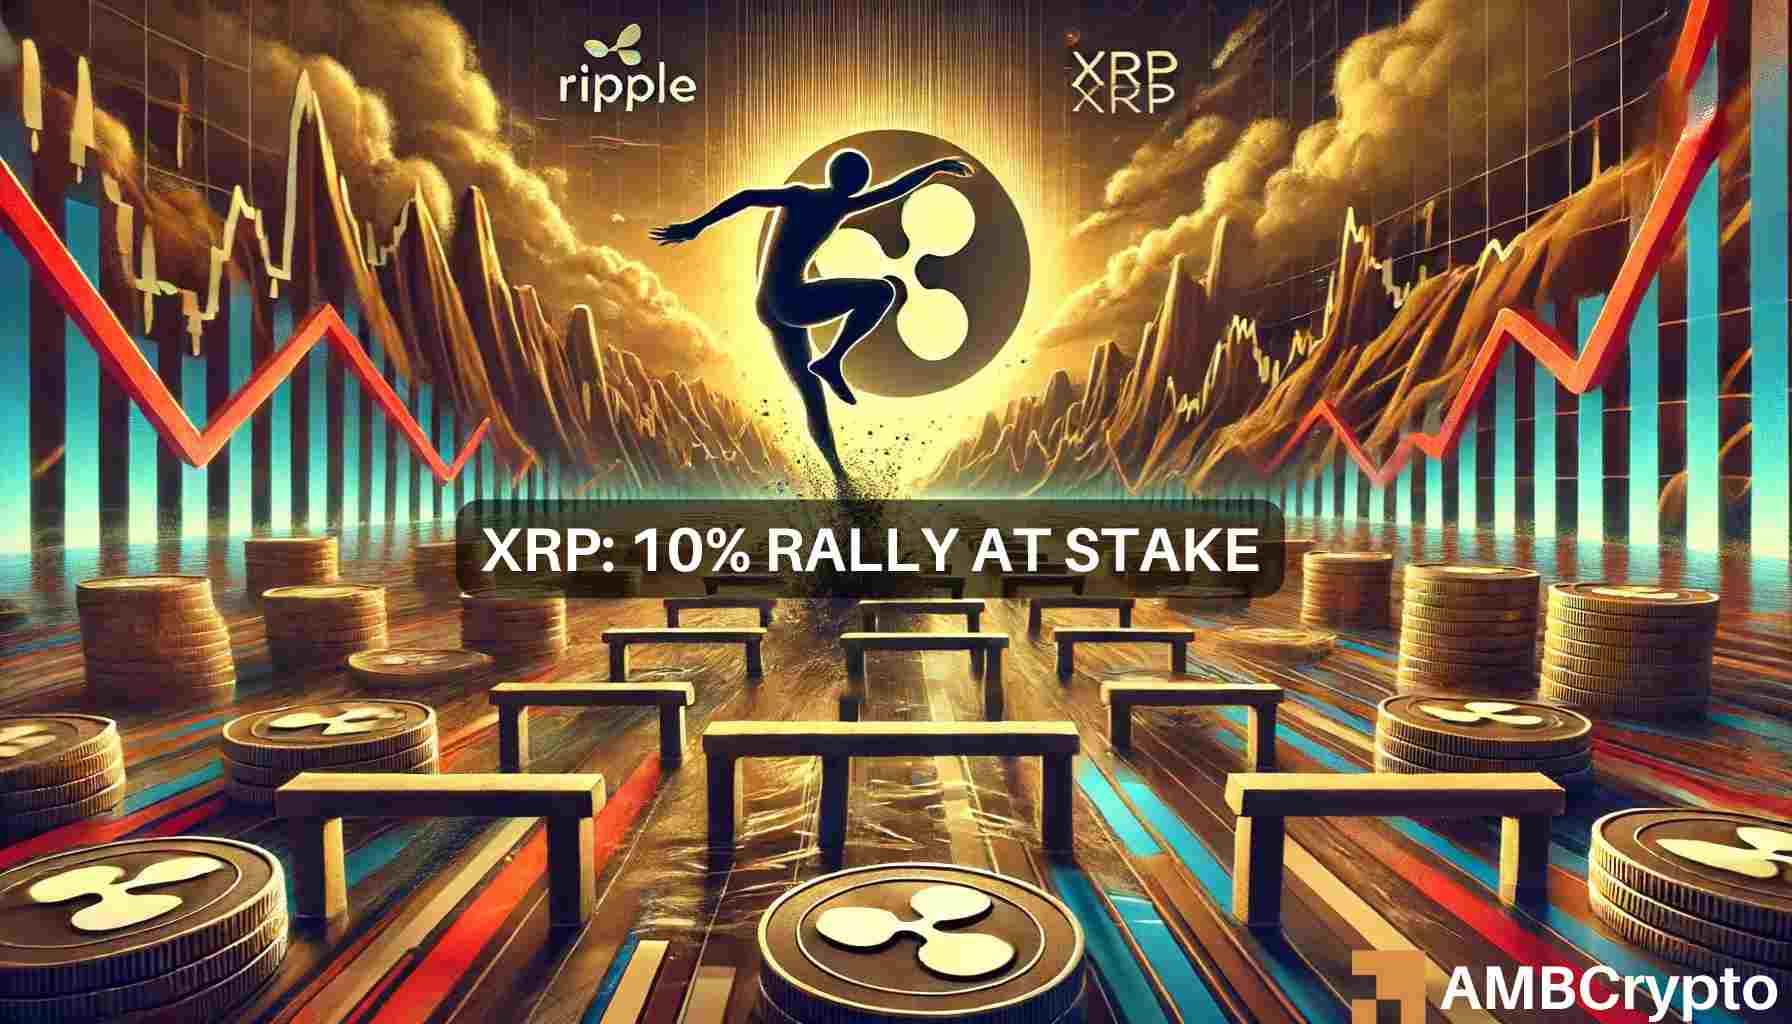 XRP price prediction: Can the altcoin stay above $0.5?